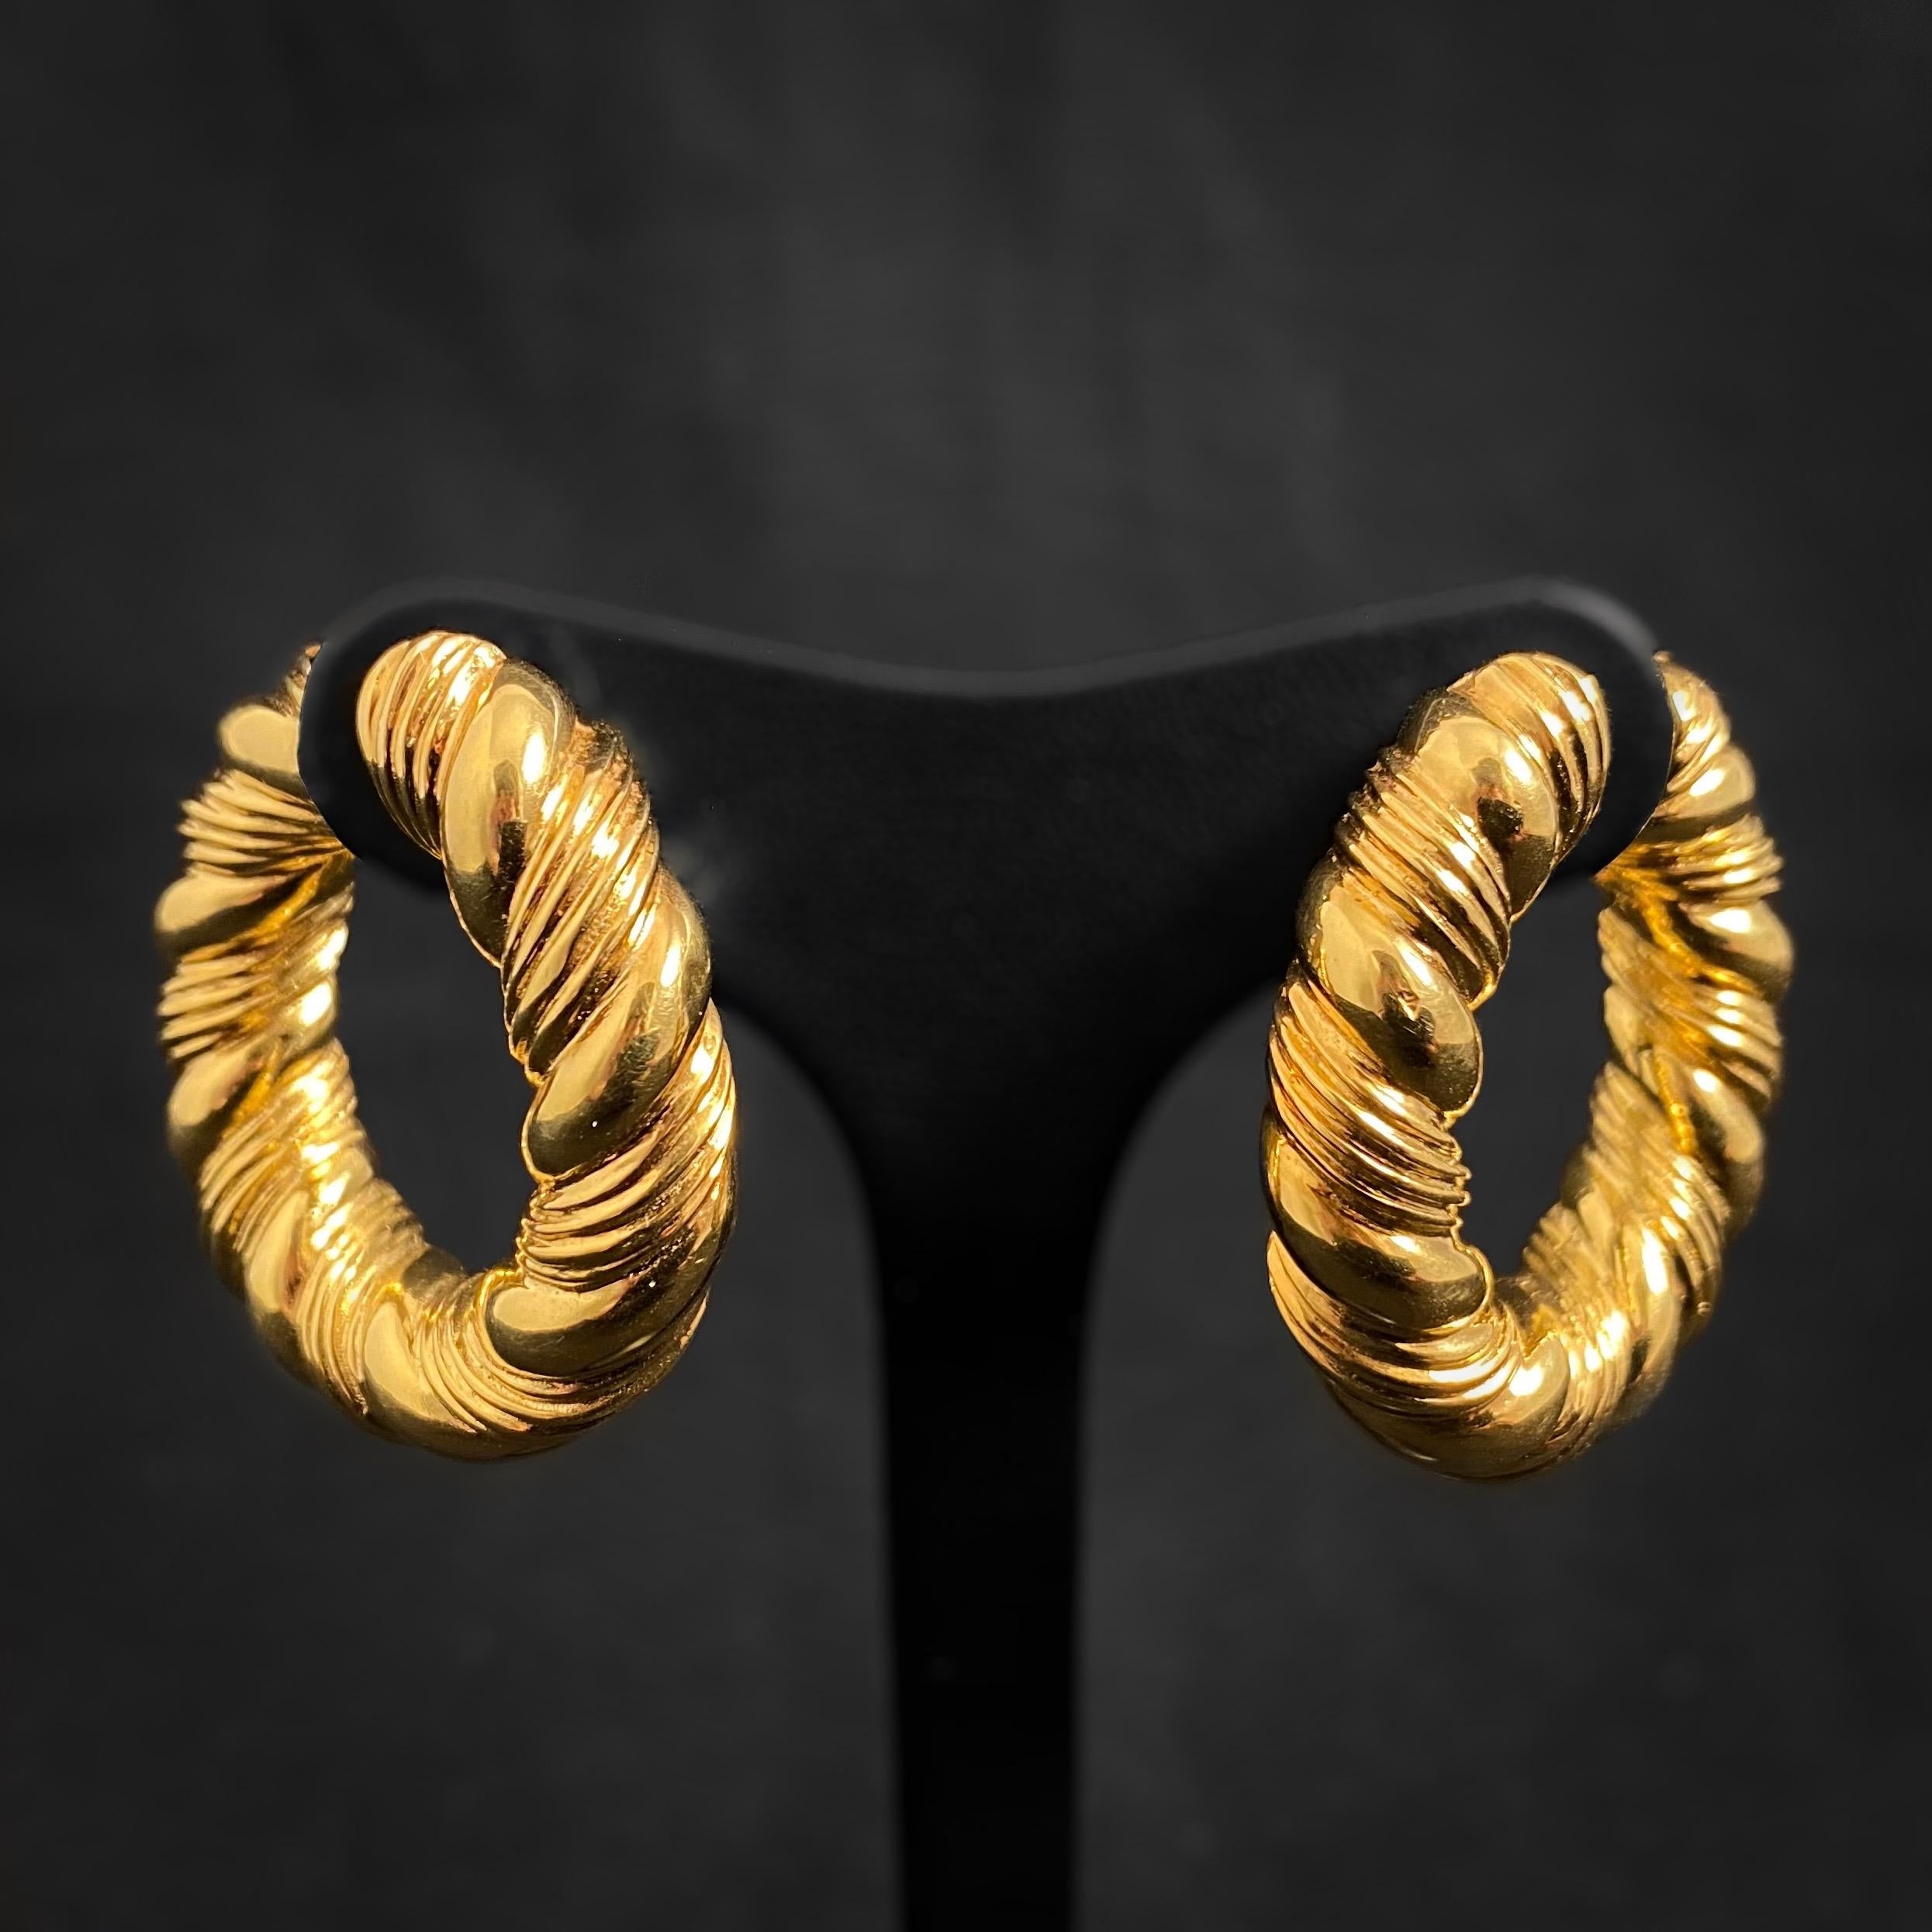 1960s Van Cleef & Arpels Braided Hoop Earrings in Yellow Gold, French, c. 1969. A pair of clip-on earrings suitable for both pierced and non-pierced ears, each designed as a yellow gold hoop with braided detailing. Comfortable and fashionable, these